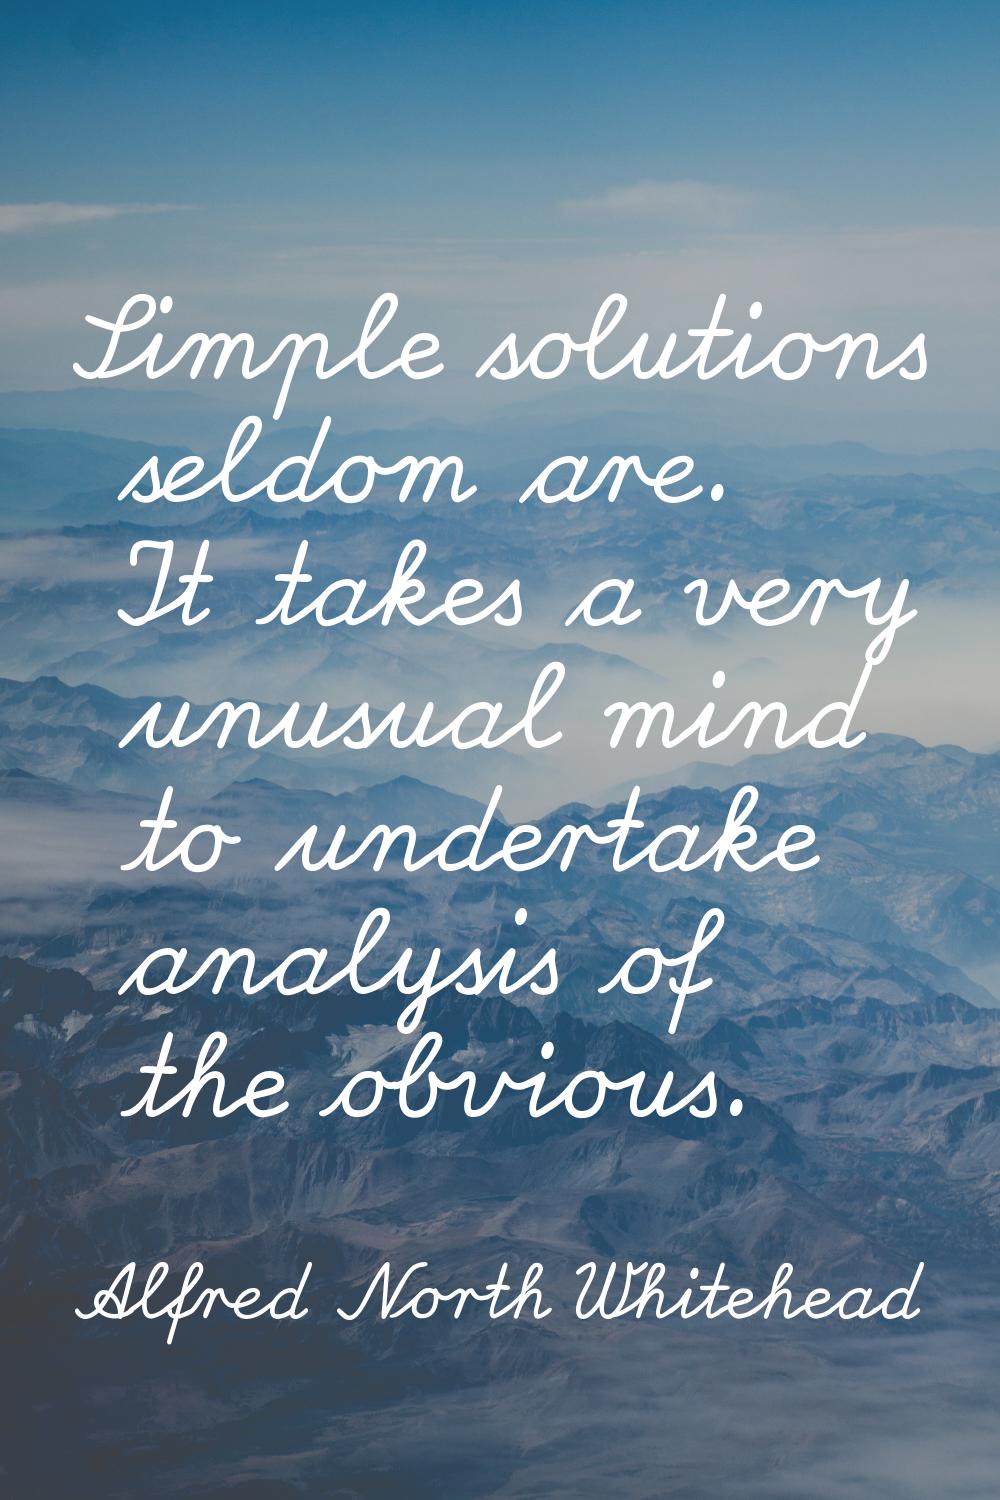 Simple solutions seldom are. It takes a very unusual mind to undertake analysis of the obvious.